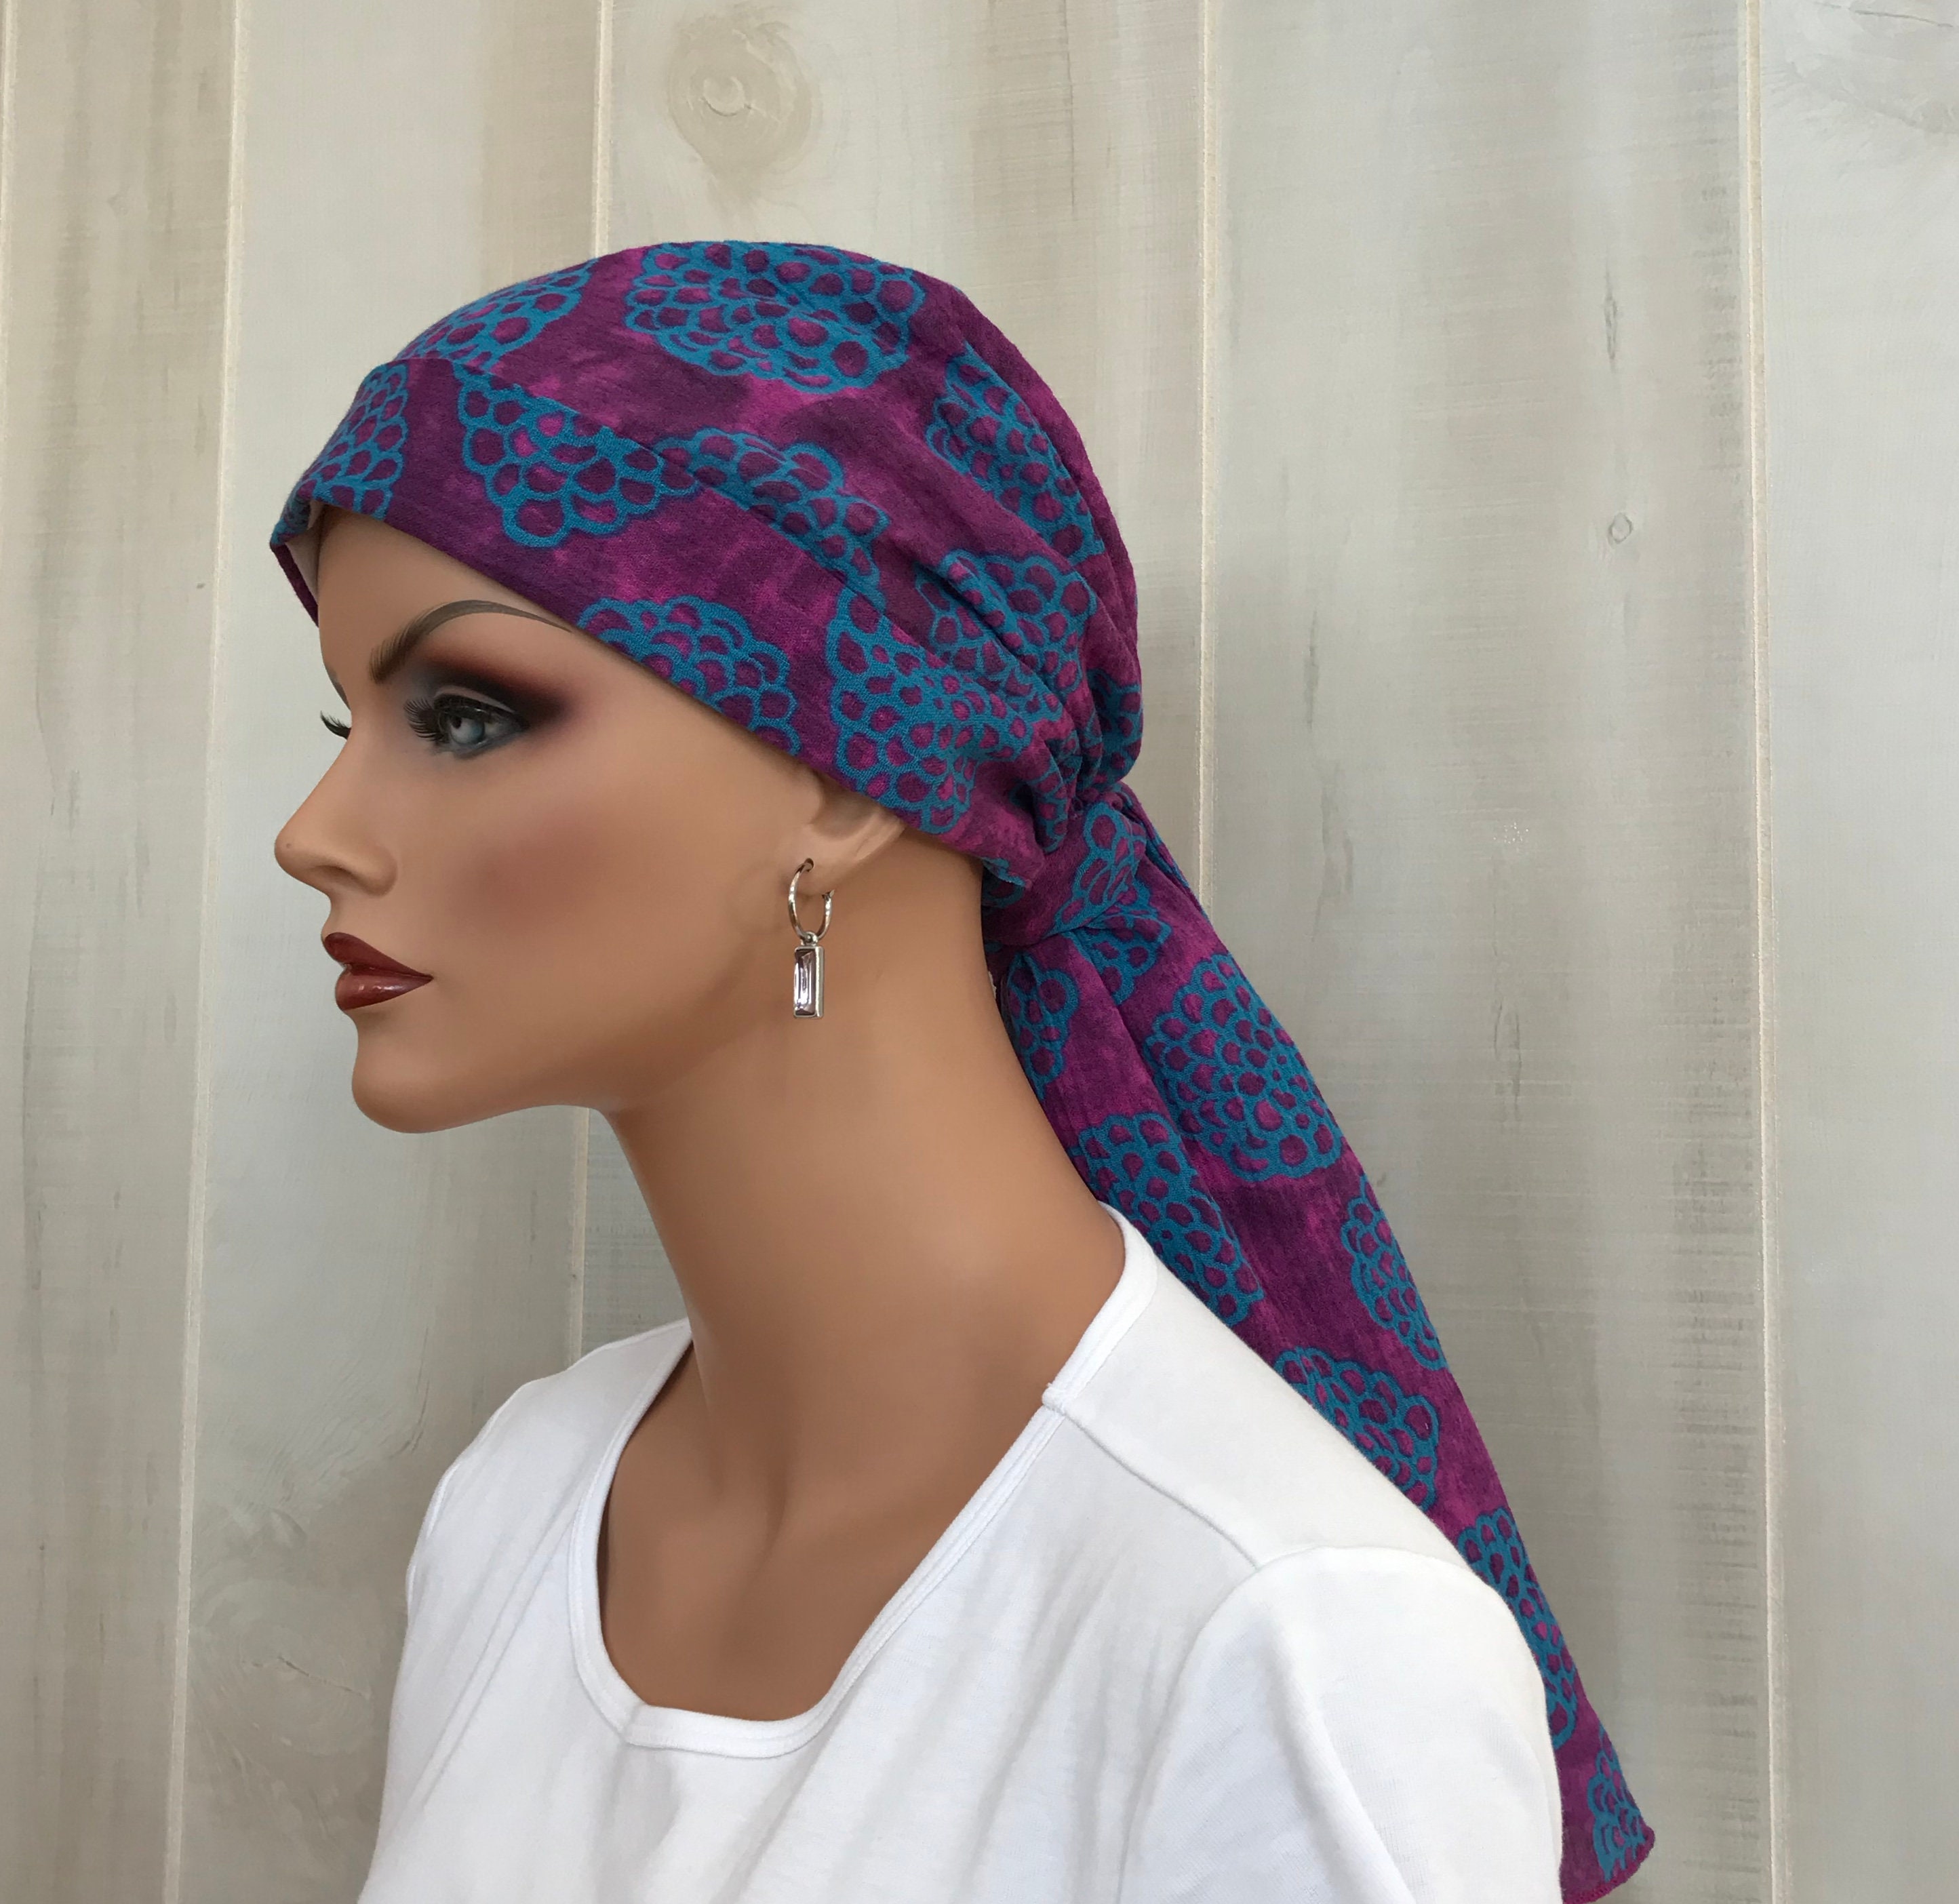 Pre-Tied Head Scarf For Women With Hair Loss. Cancer Headwear 